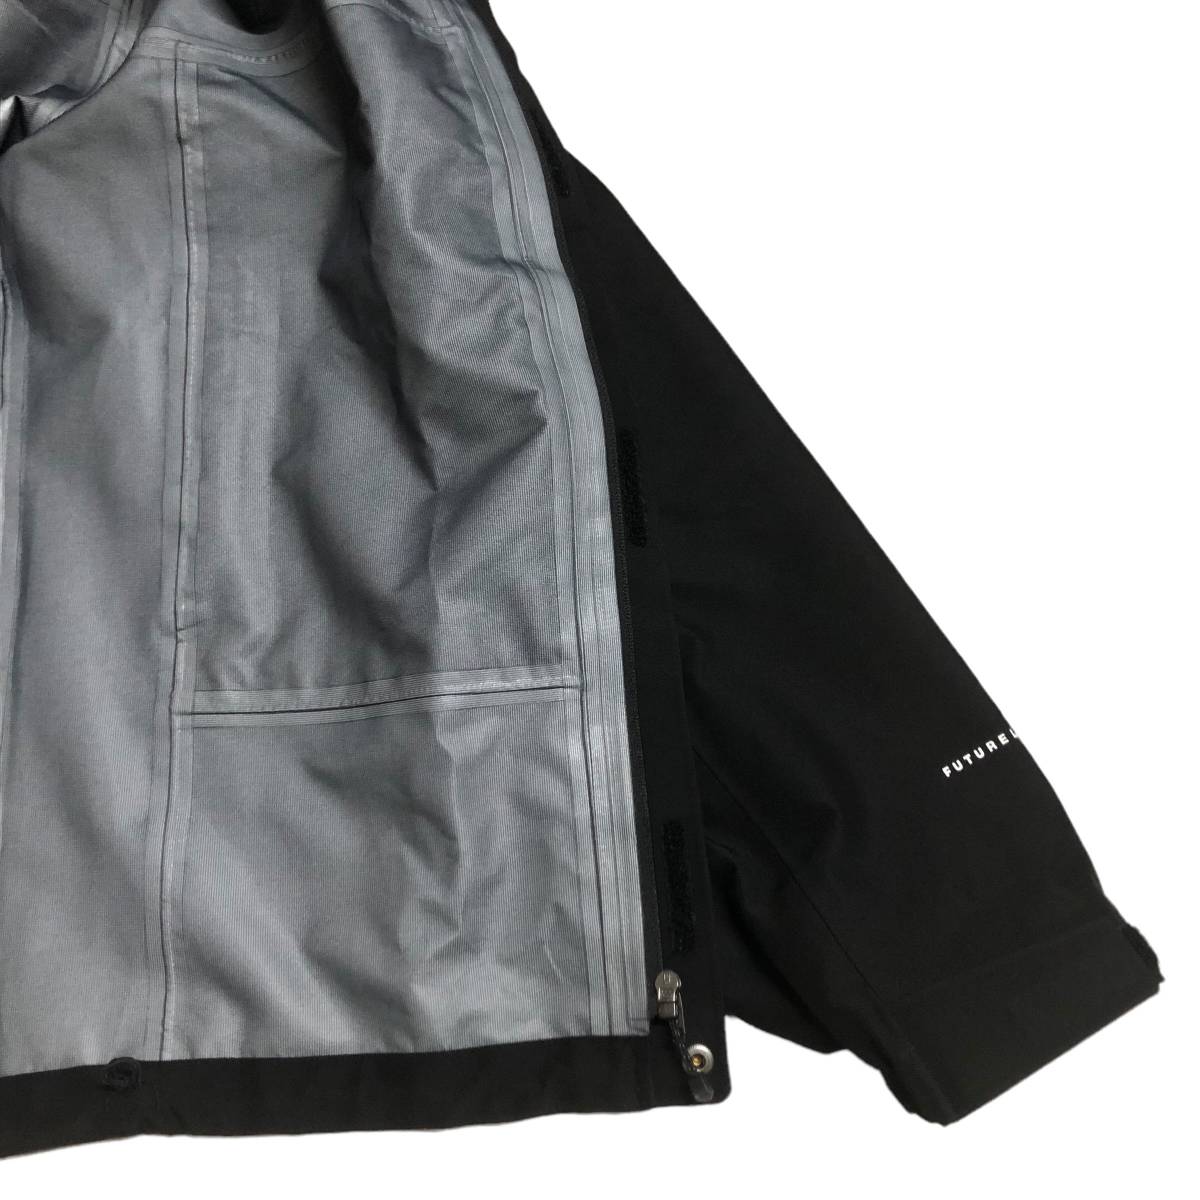 THE NORTH FACE ザノースフェイス FL DRIZZLE JACKET FLドリズル